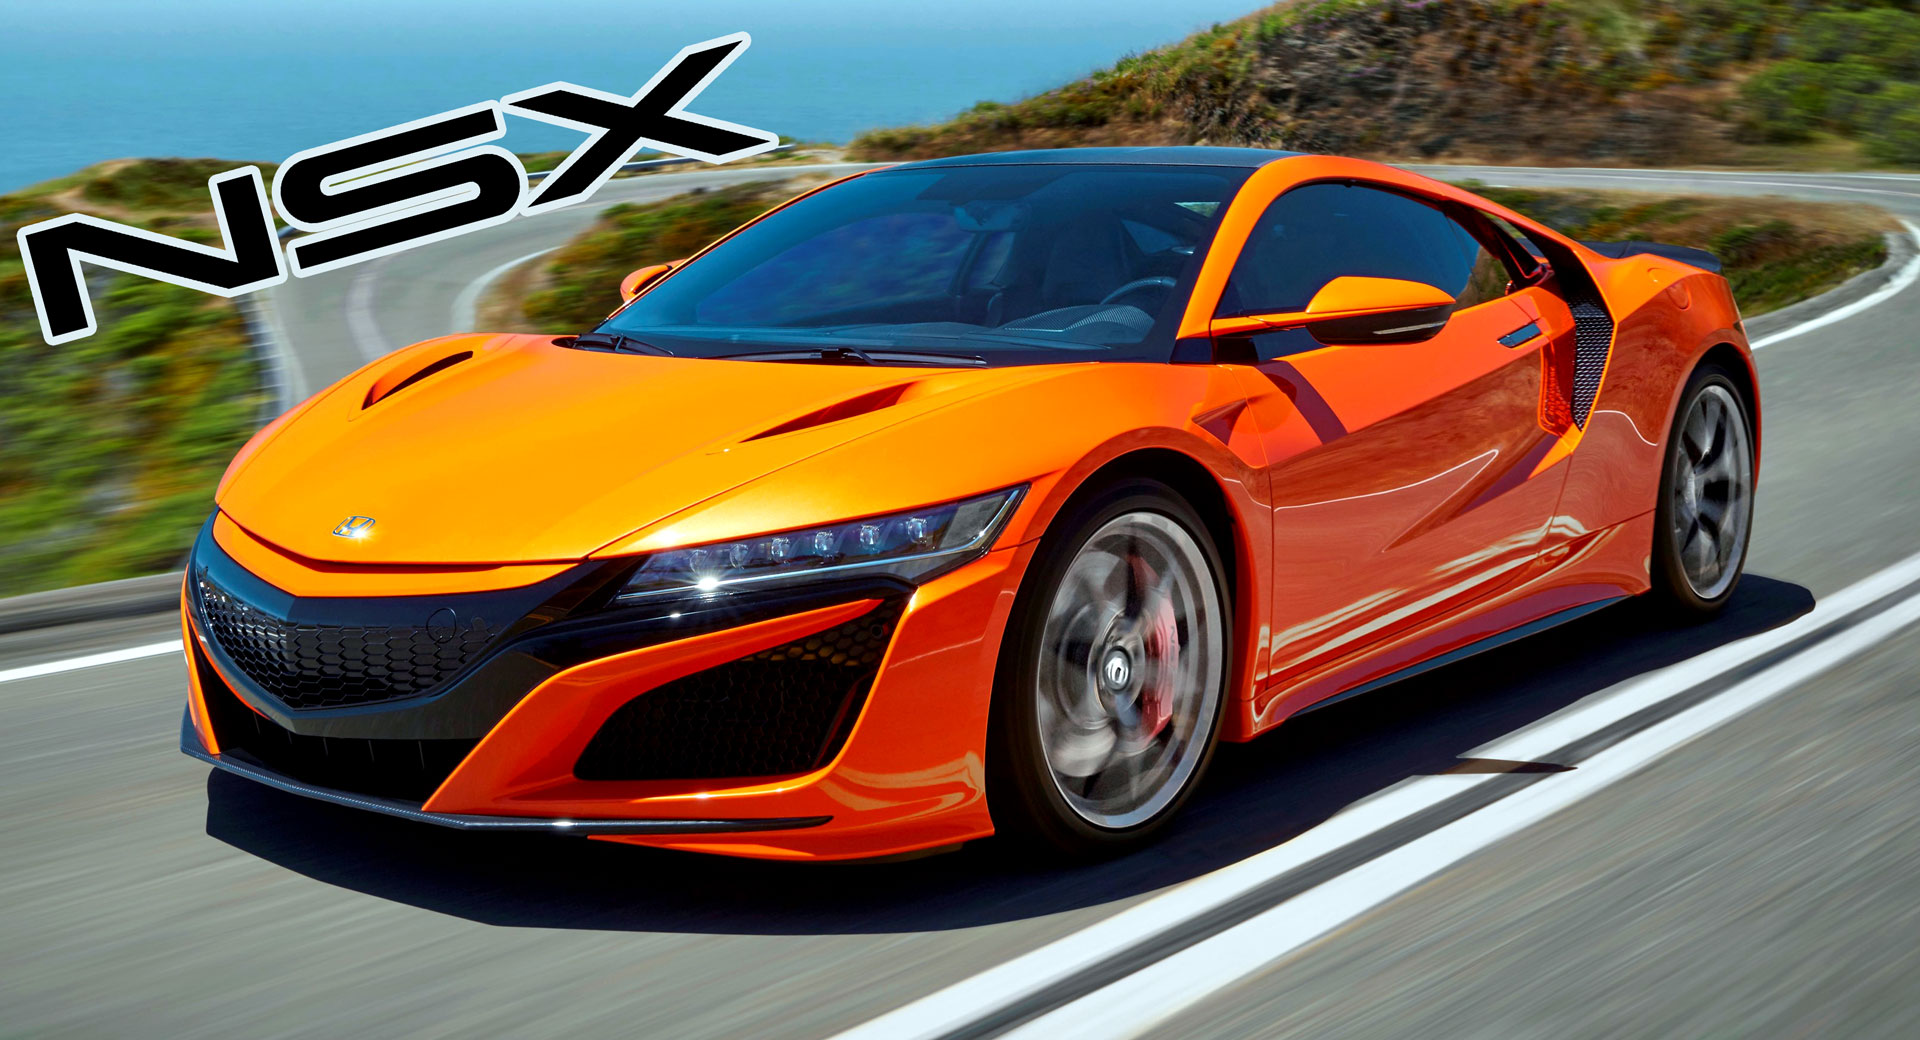 Qotd Did The Second Generation Acura Honda Nsx Ever Reach Its Full Potential Carscoops